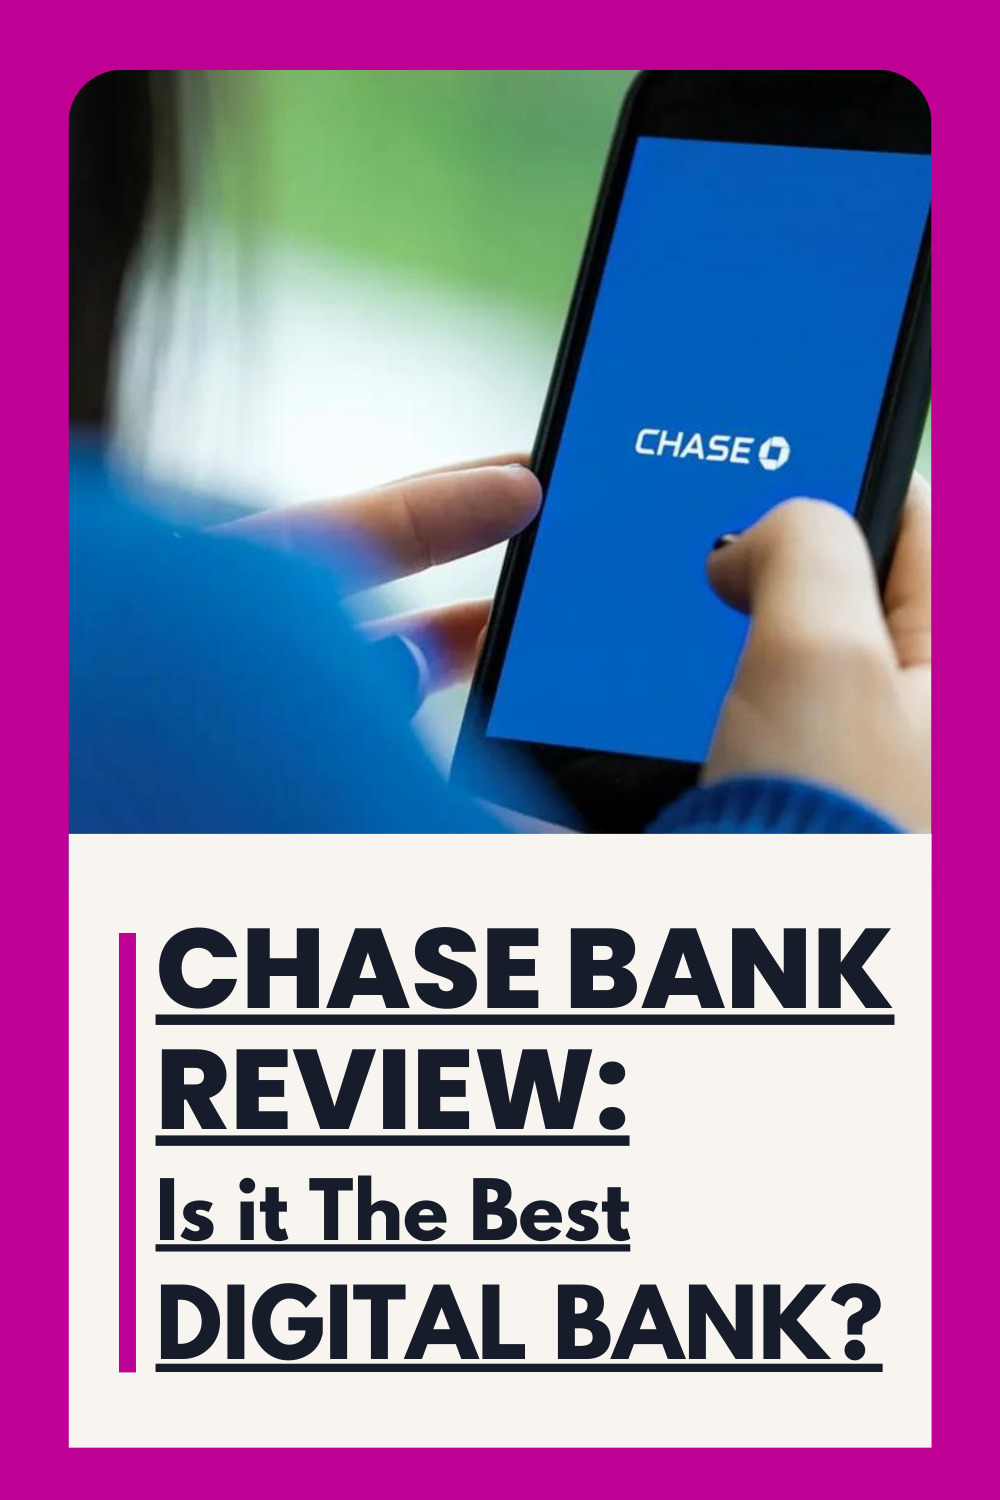 Chase Bank Review: Is it The Best Digital Bank?
